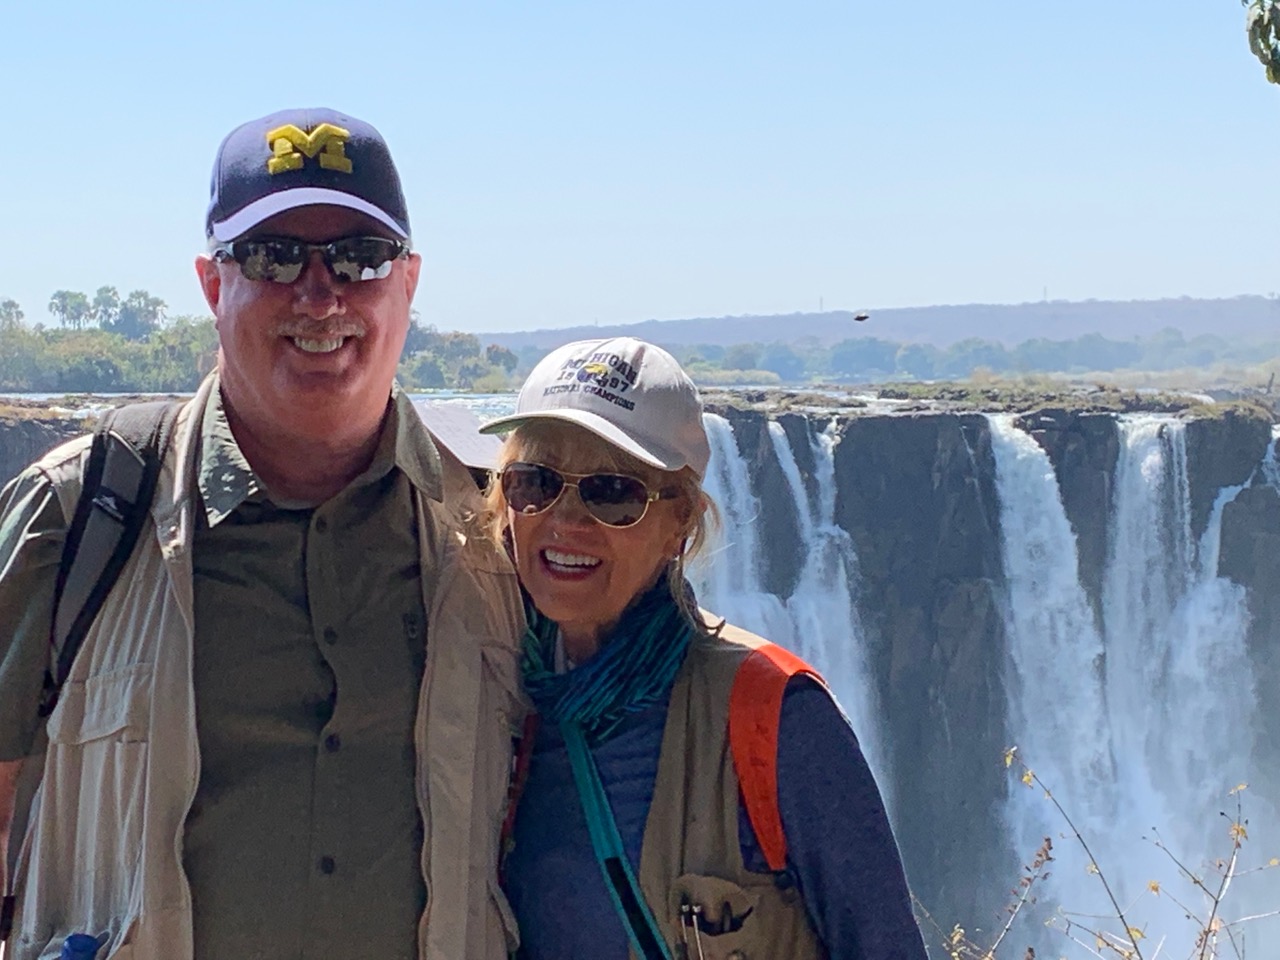 Mark Oakeson, ’80, met fellow alumna Judy Erwin Wilkerson, ’66, during a visit to Victoria Falls in Zimbabwe. Mark’s wife, Lu, took the photo.